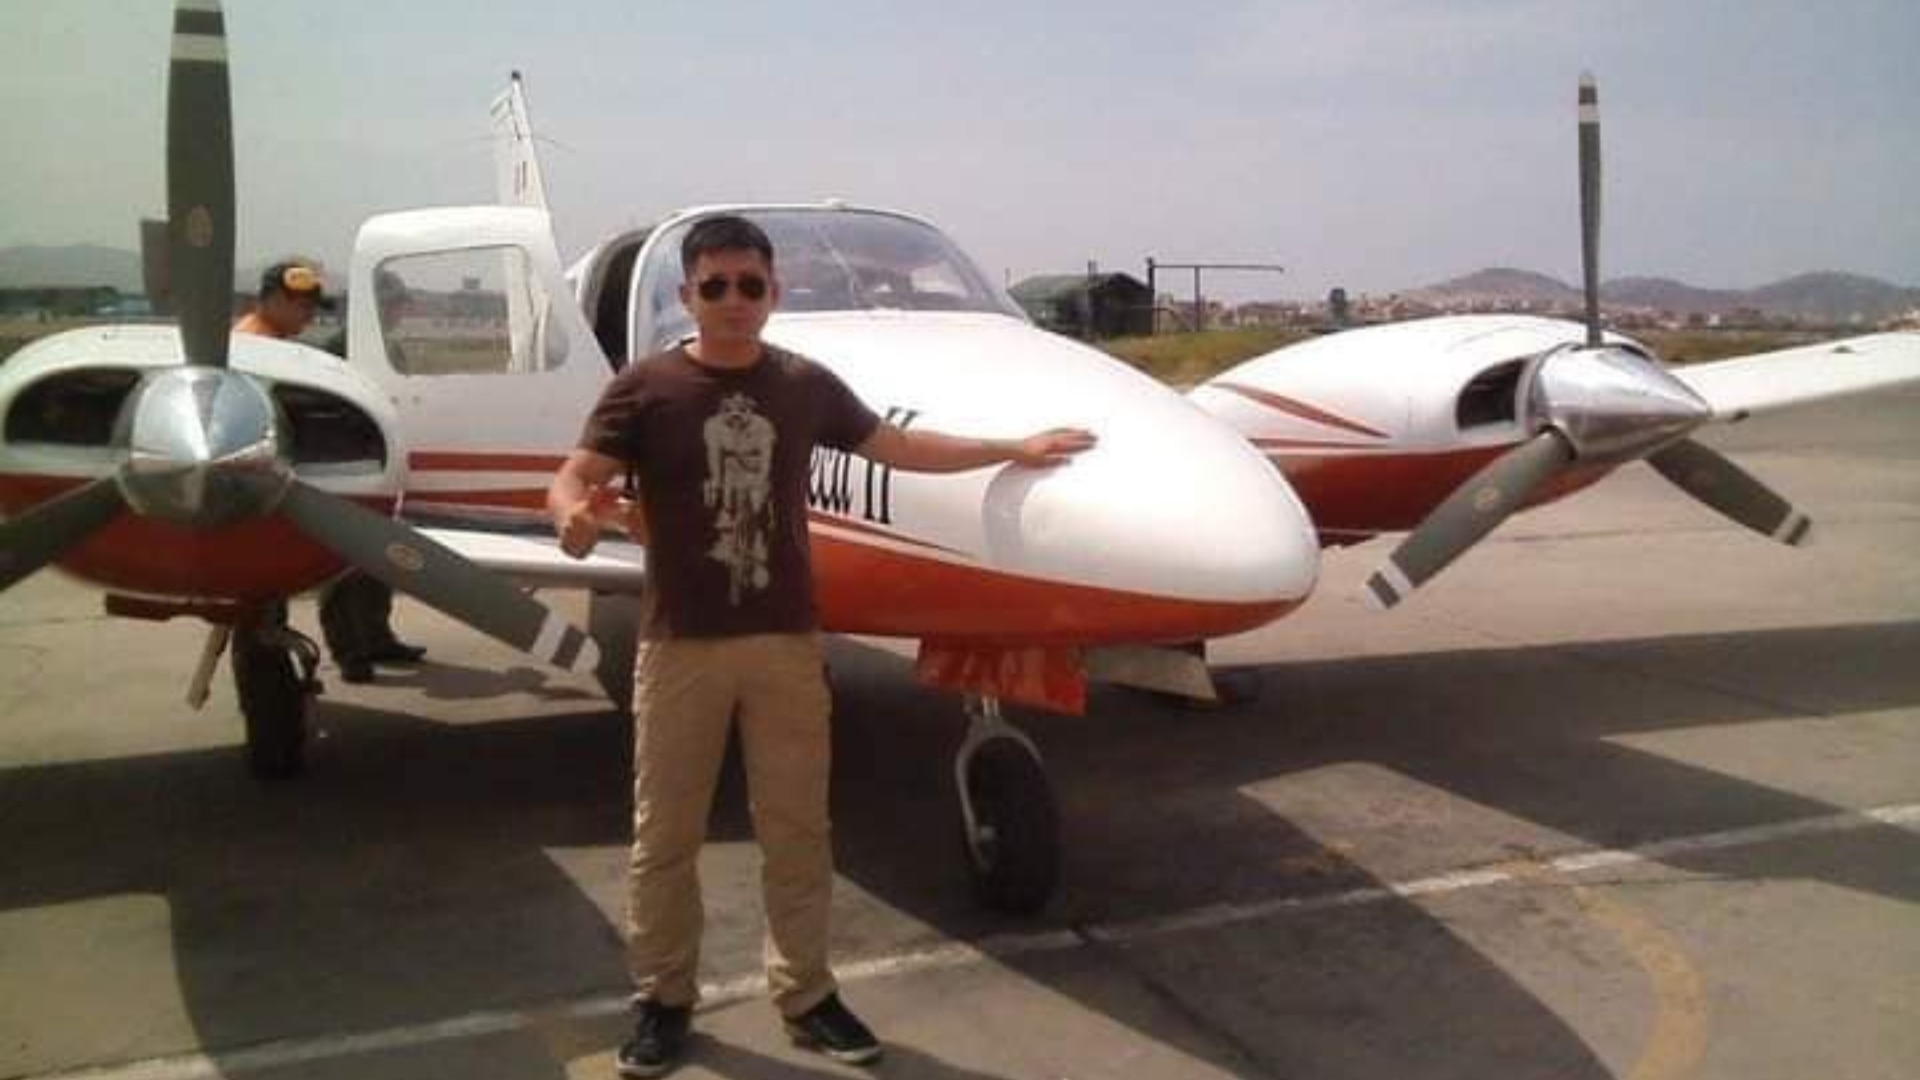 Trujillo: they confirm that the second body found is that of the pilot of the aircraft that fell into the Huanchaco sea, Santiago Aldaz García|Erling Valverde News